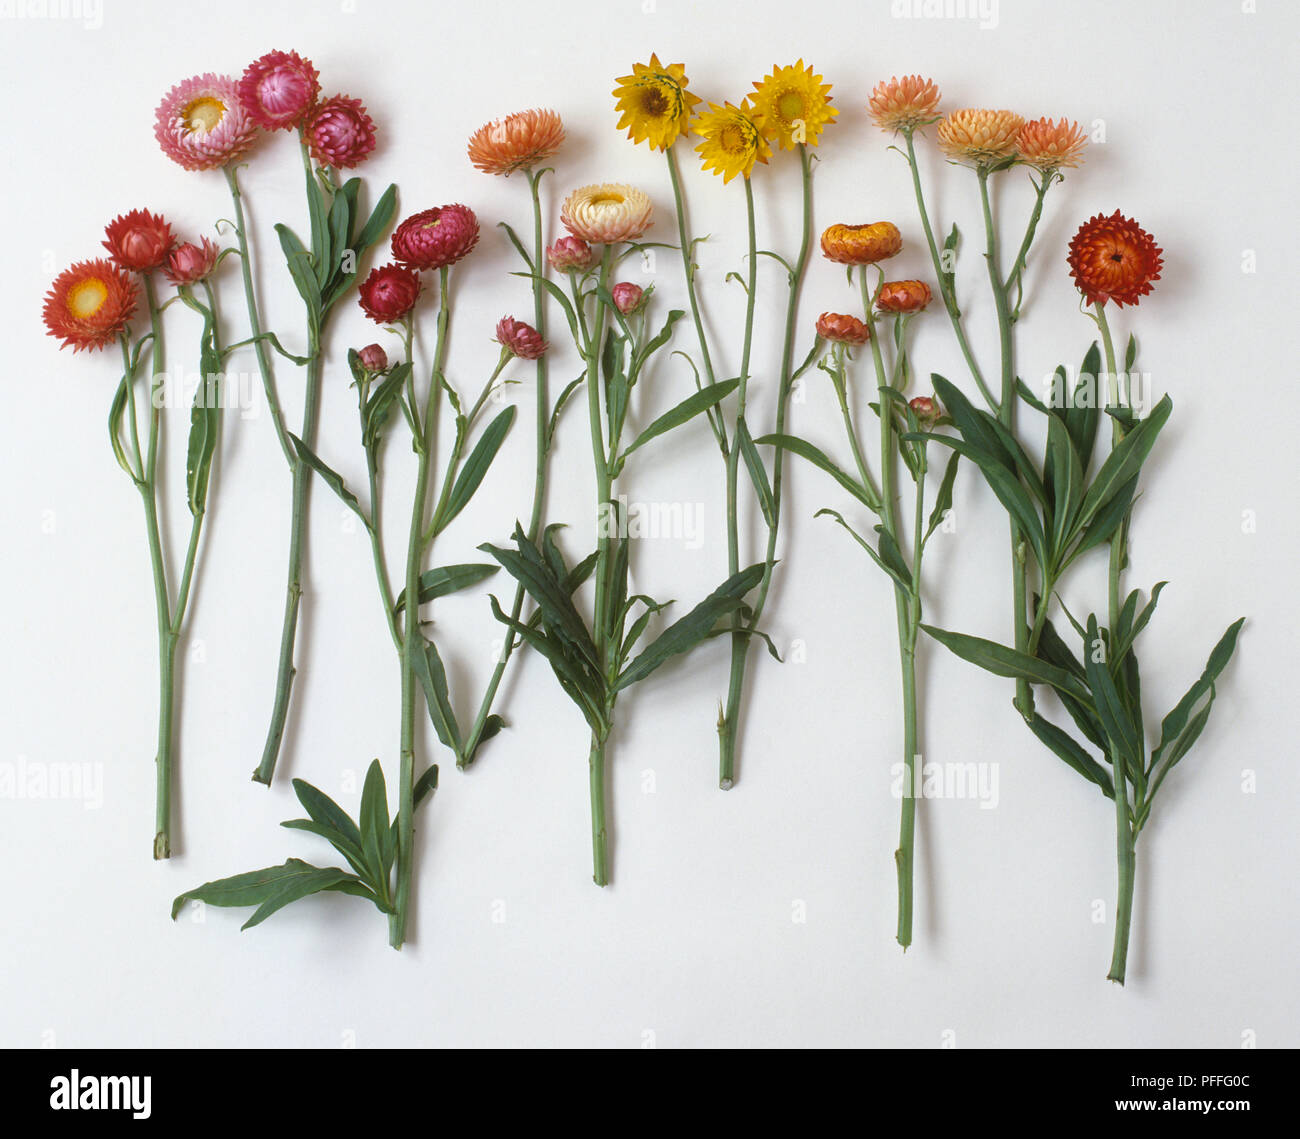 Colour varieties of Helichrysum sp. (Strawflowers), in a row Stock Photo